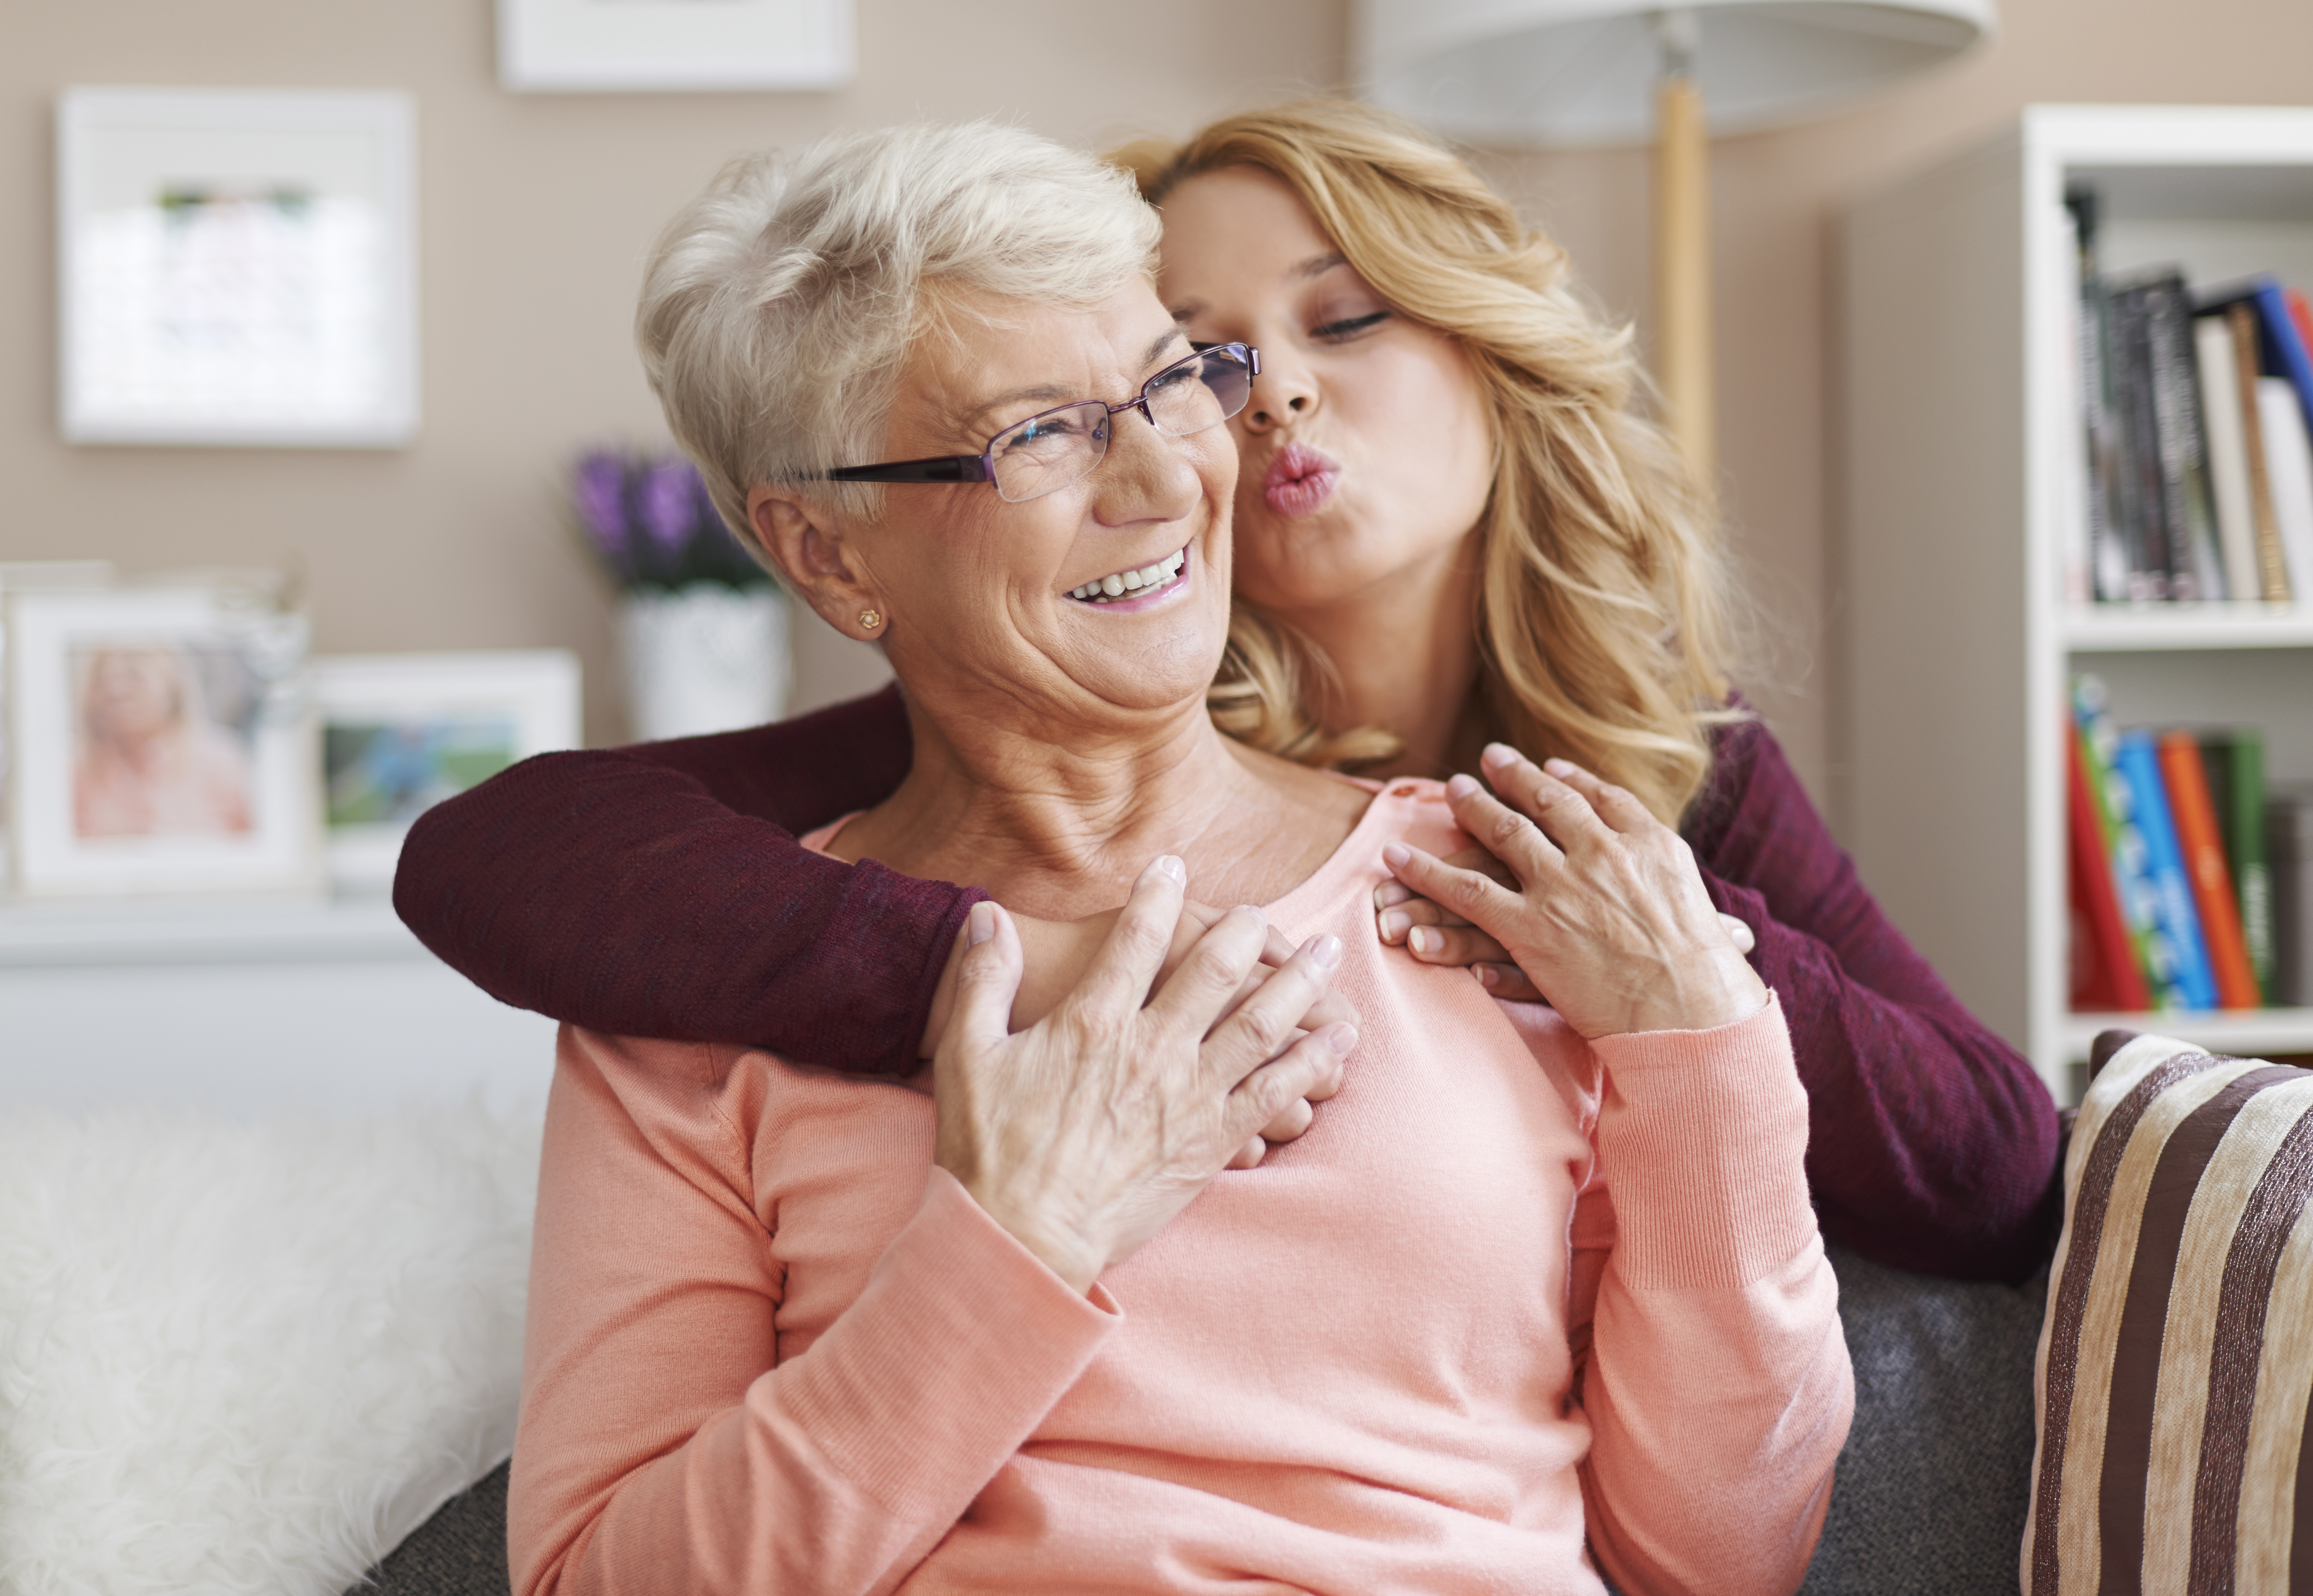 Teen girl hugging her smiling grandmother from behind and attempting to kiss her | Source: gpointstudio on Freepik